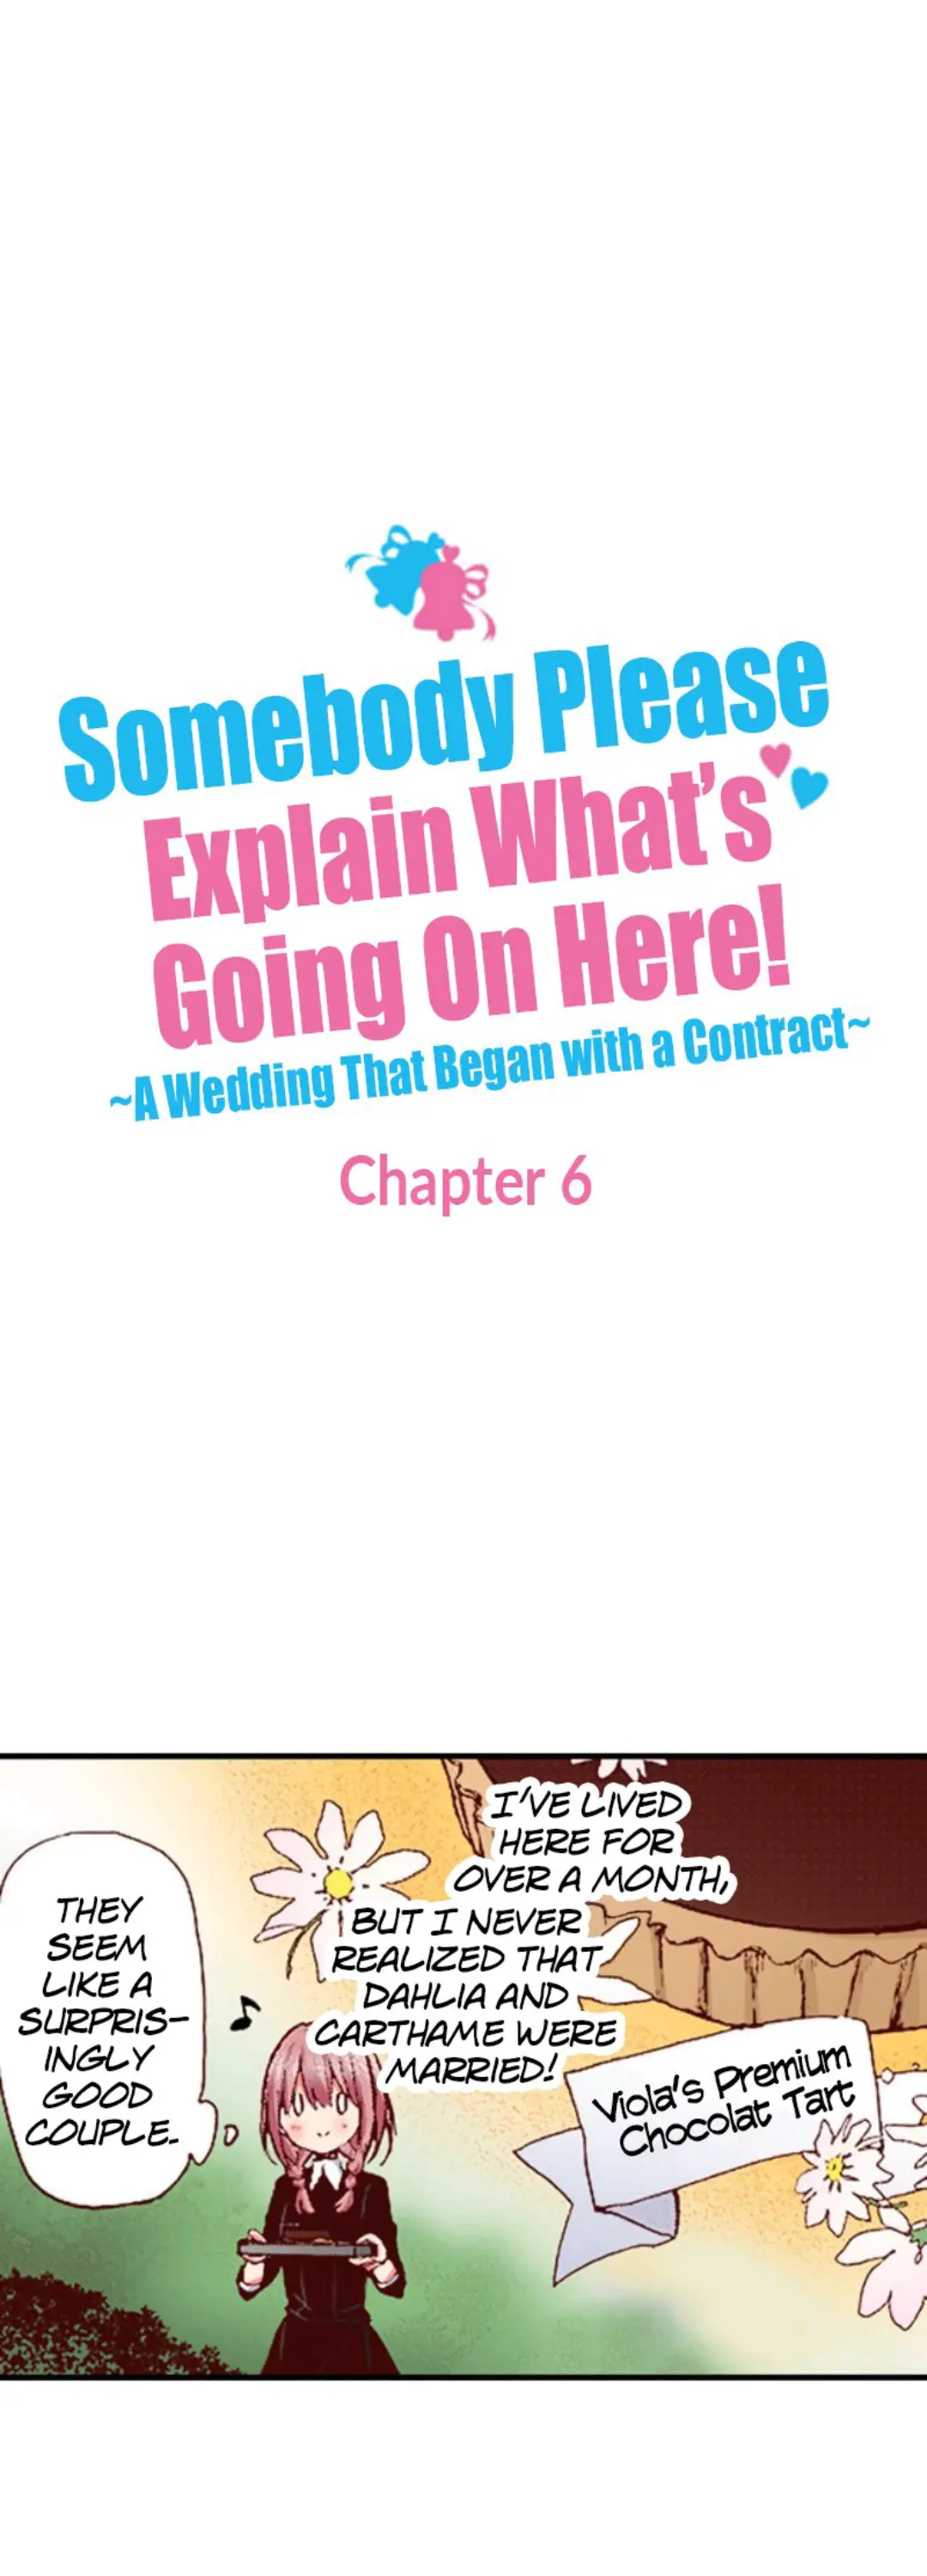 Somebody Please Explain What’s Going On Here! ~A Wedding that Began With a Contract~ chapter 6